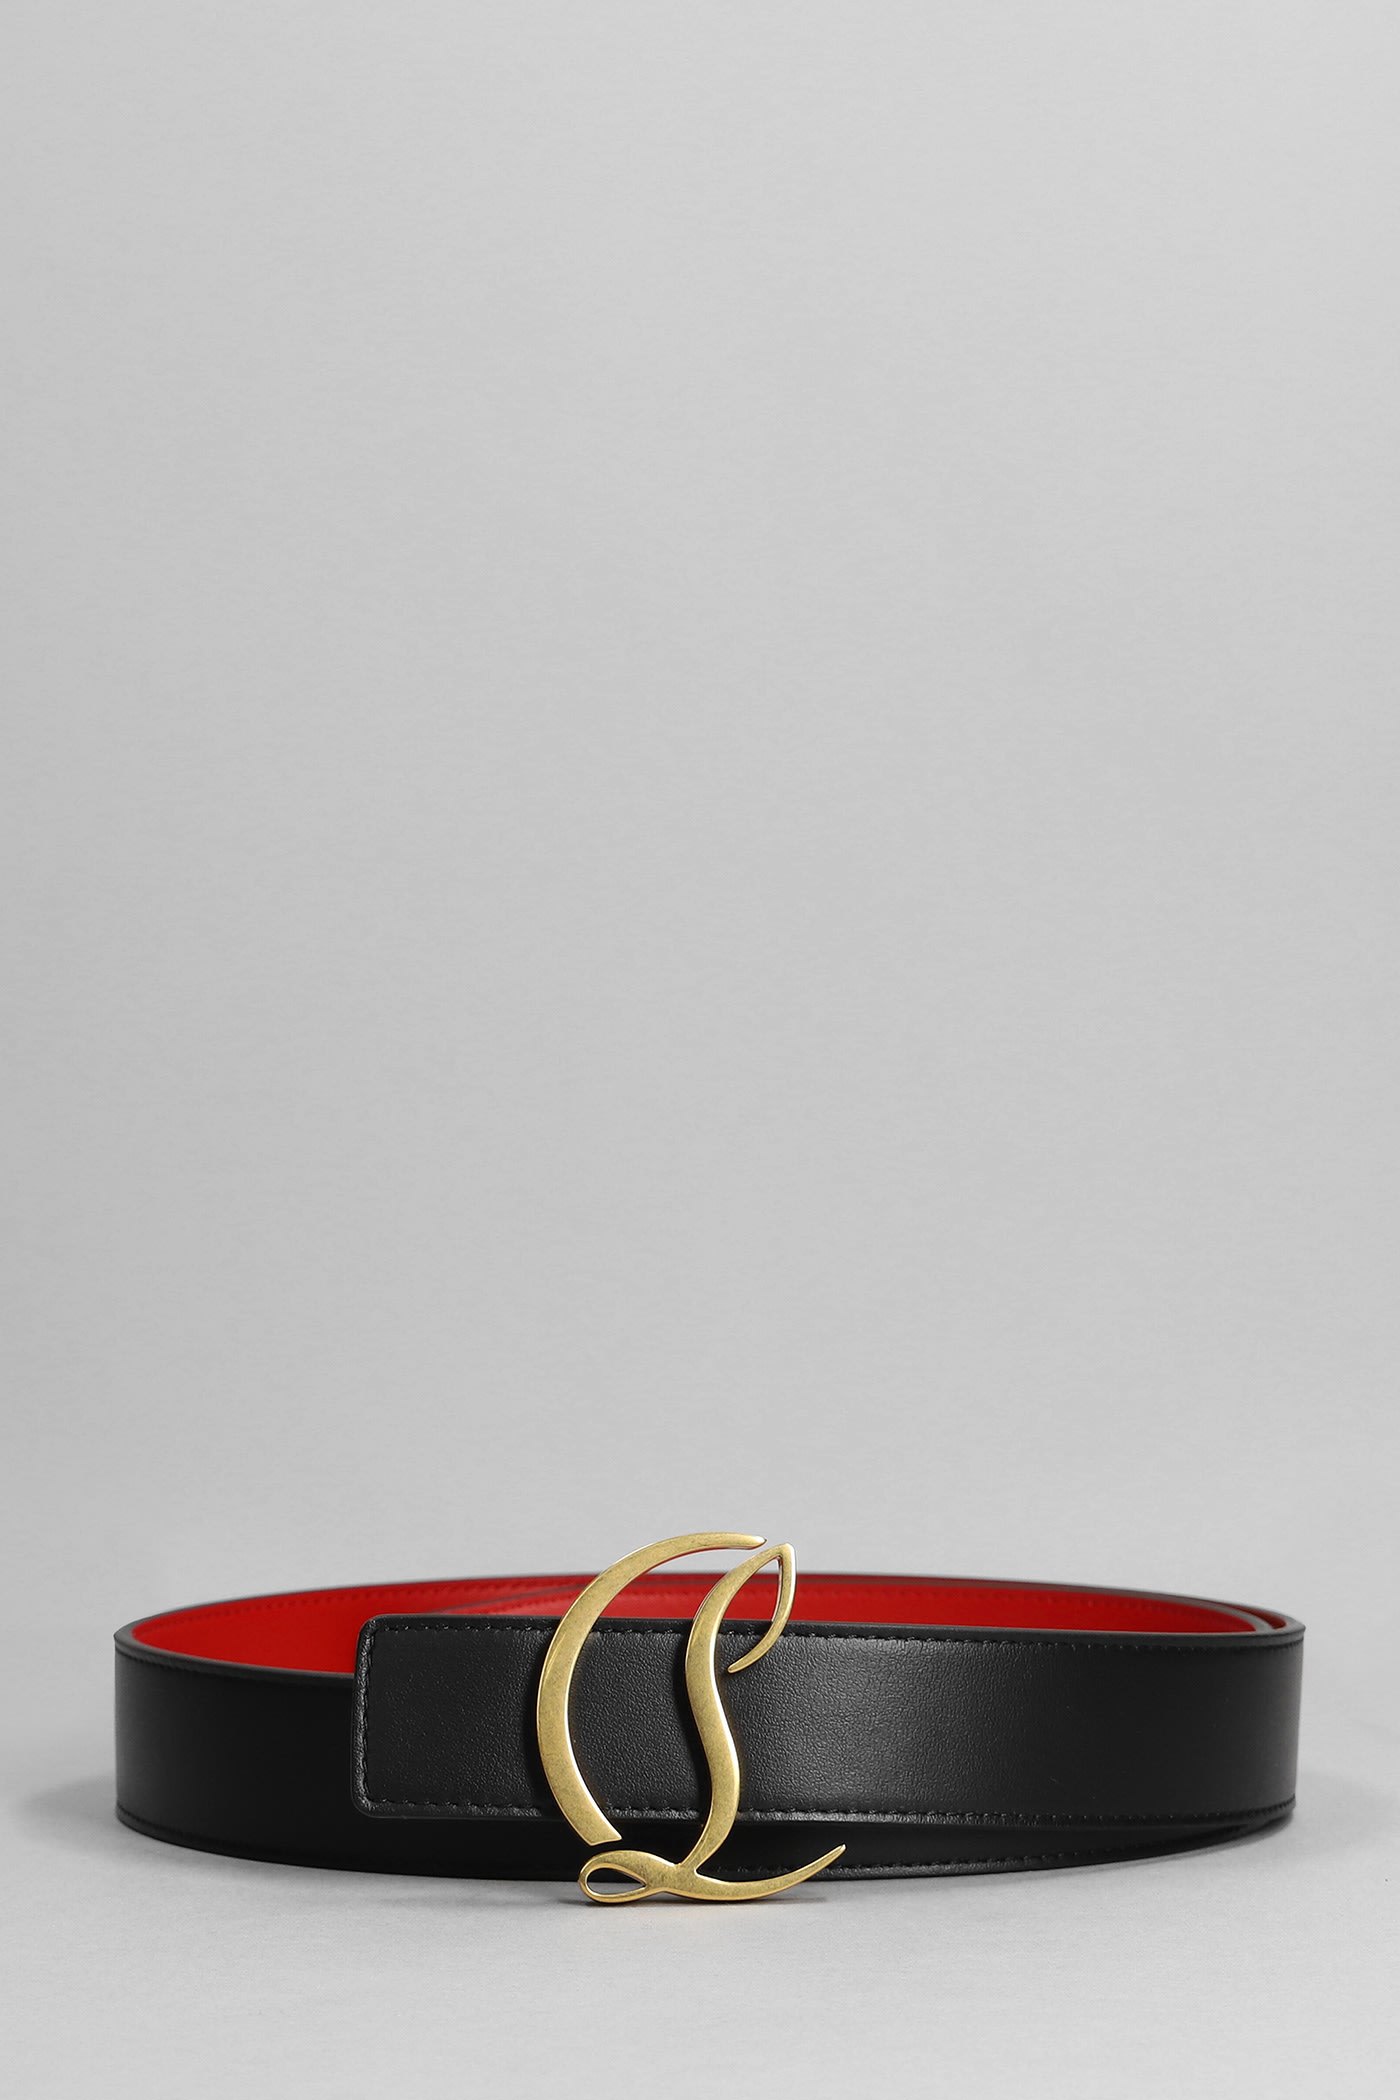 Christian Louboutin Belts In Black Leather